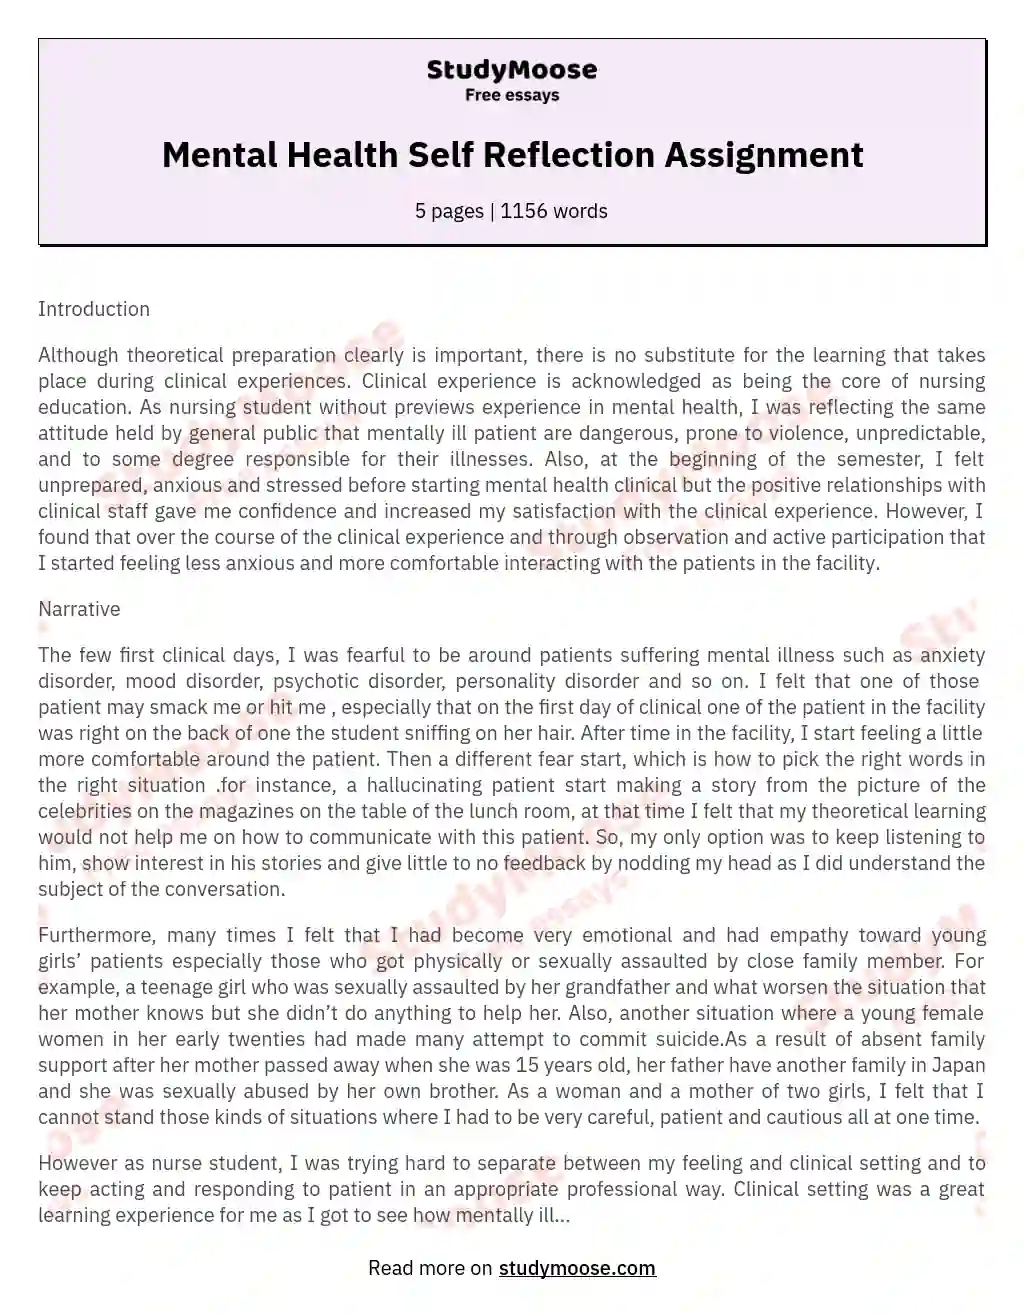 Mental Health Self Reflection Assignment essay